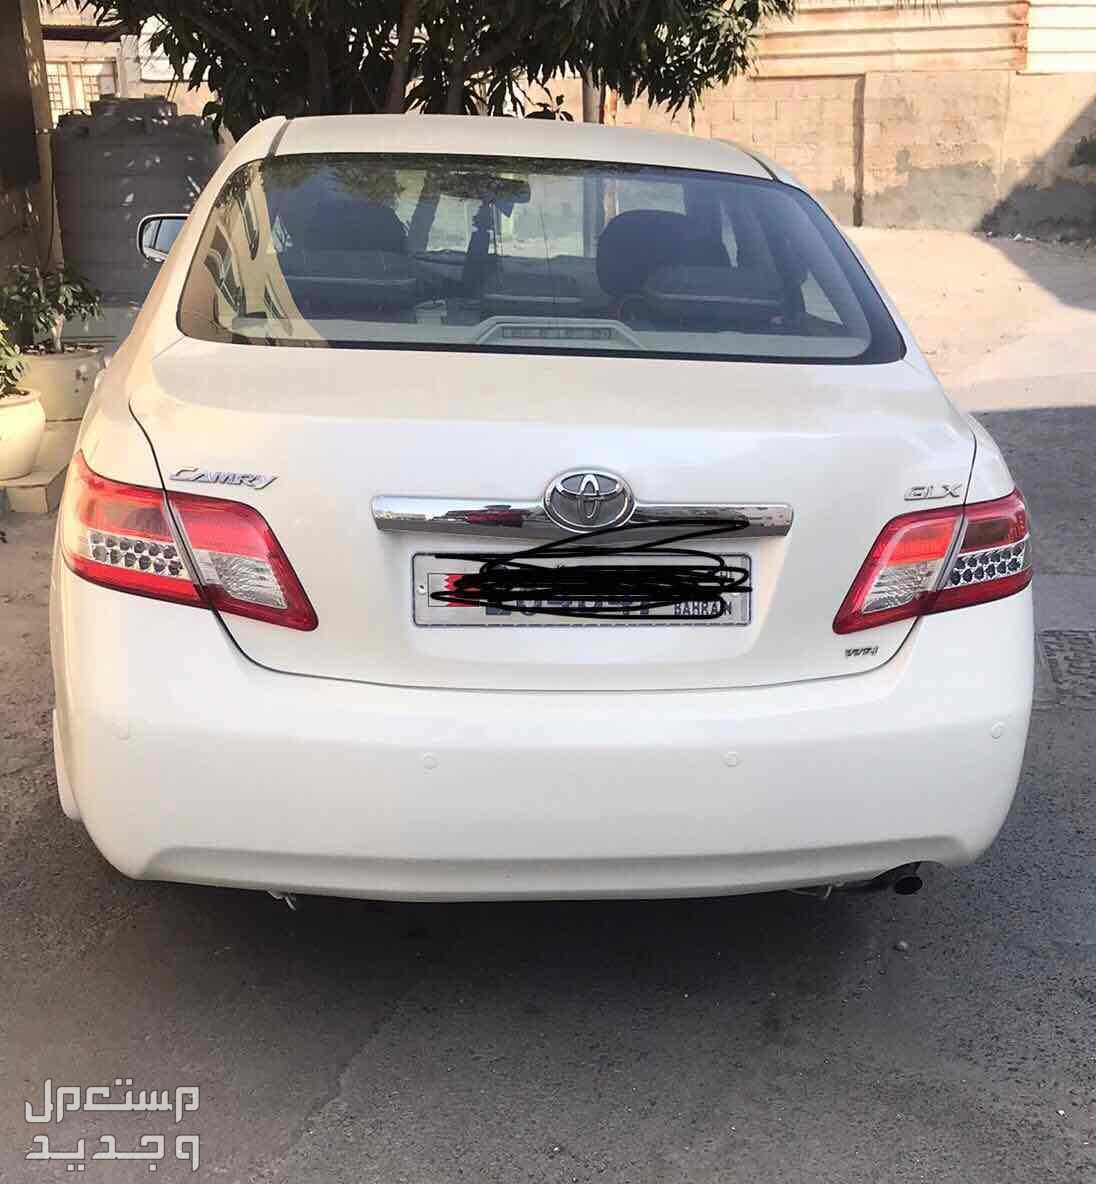 Toyota Camry 2011 in Muharraq at a price of 2800 BHD